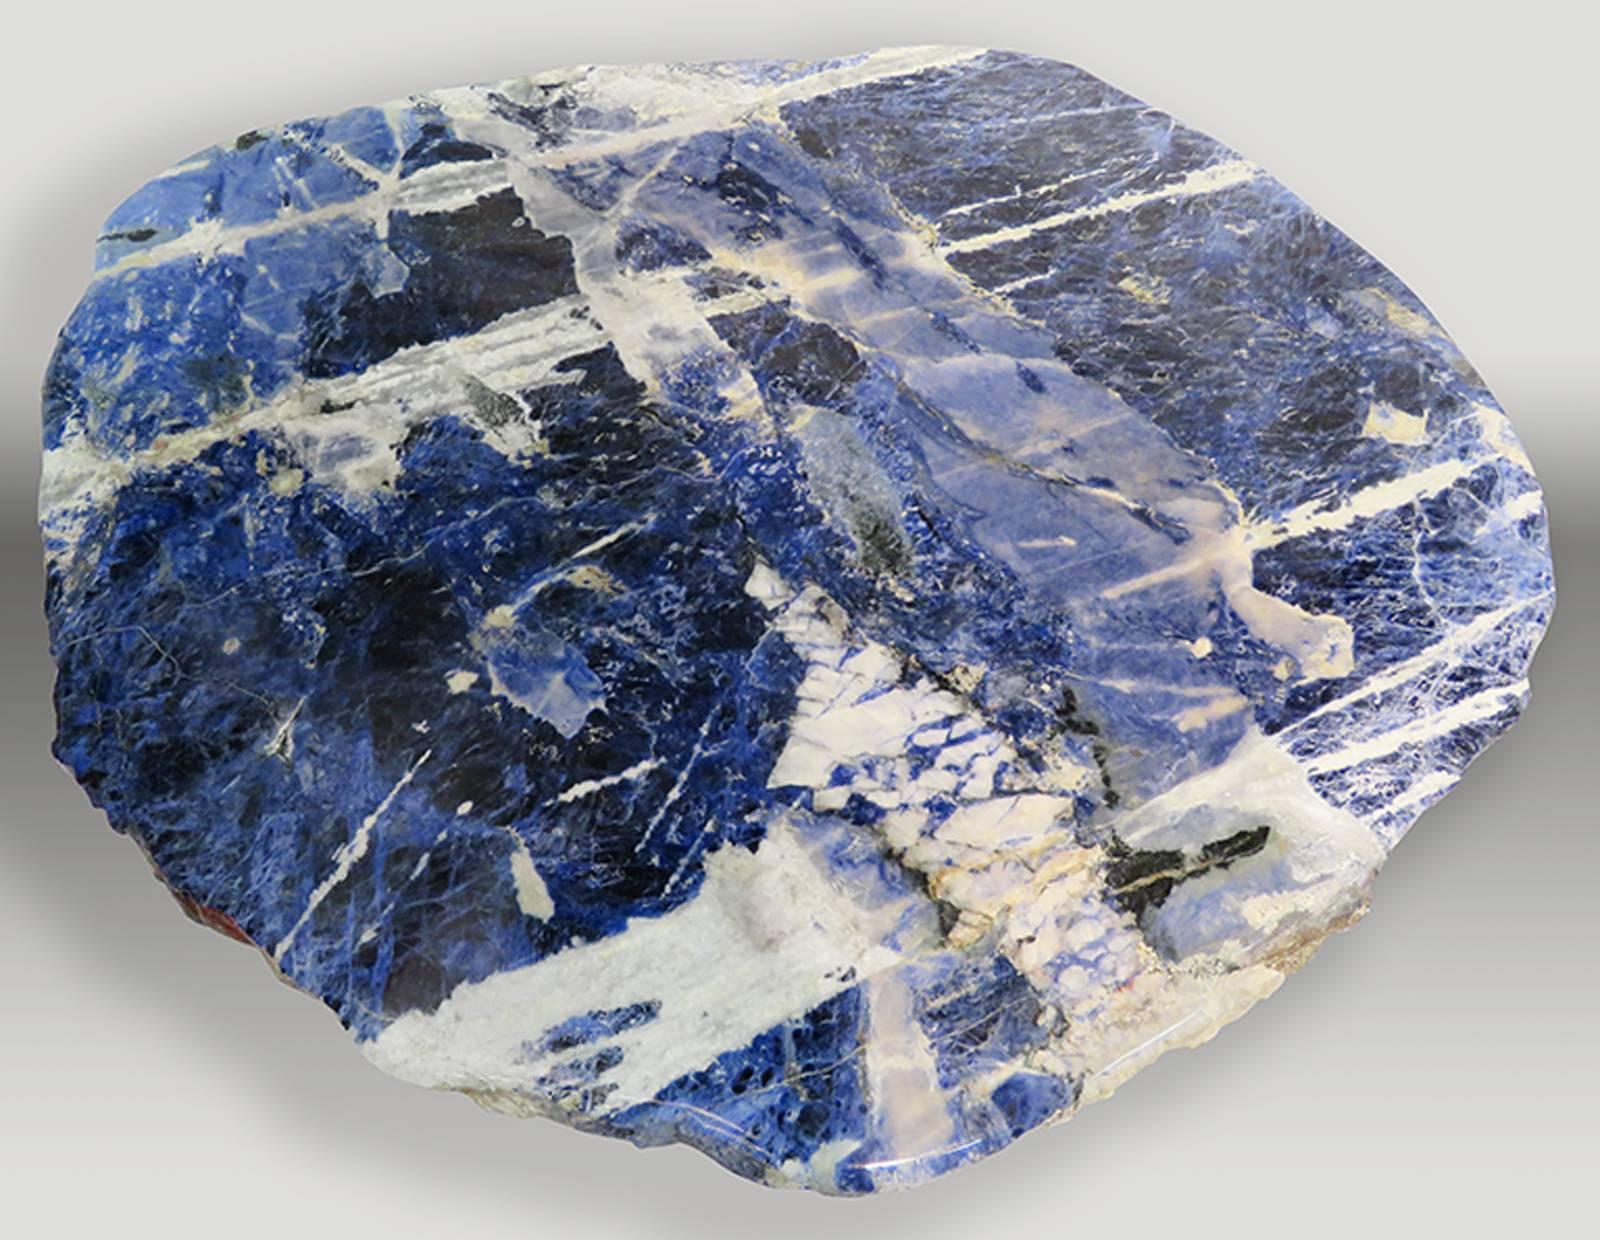 Sodalite slabs from Brazil.
Pair of sodalite center tables, each table has its own base so it can be adjusted to the space needed.
Sodalite o means “sodium stone”, because its chemical composition presents great amounts of sodium.
Sodalite is a